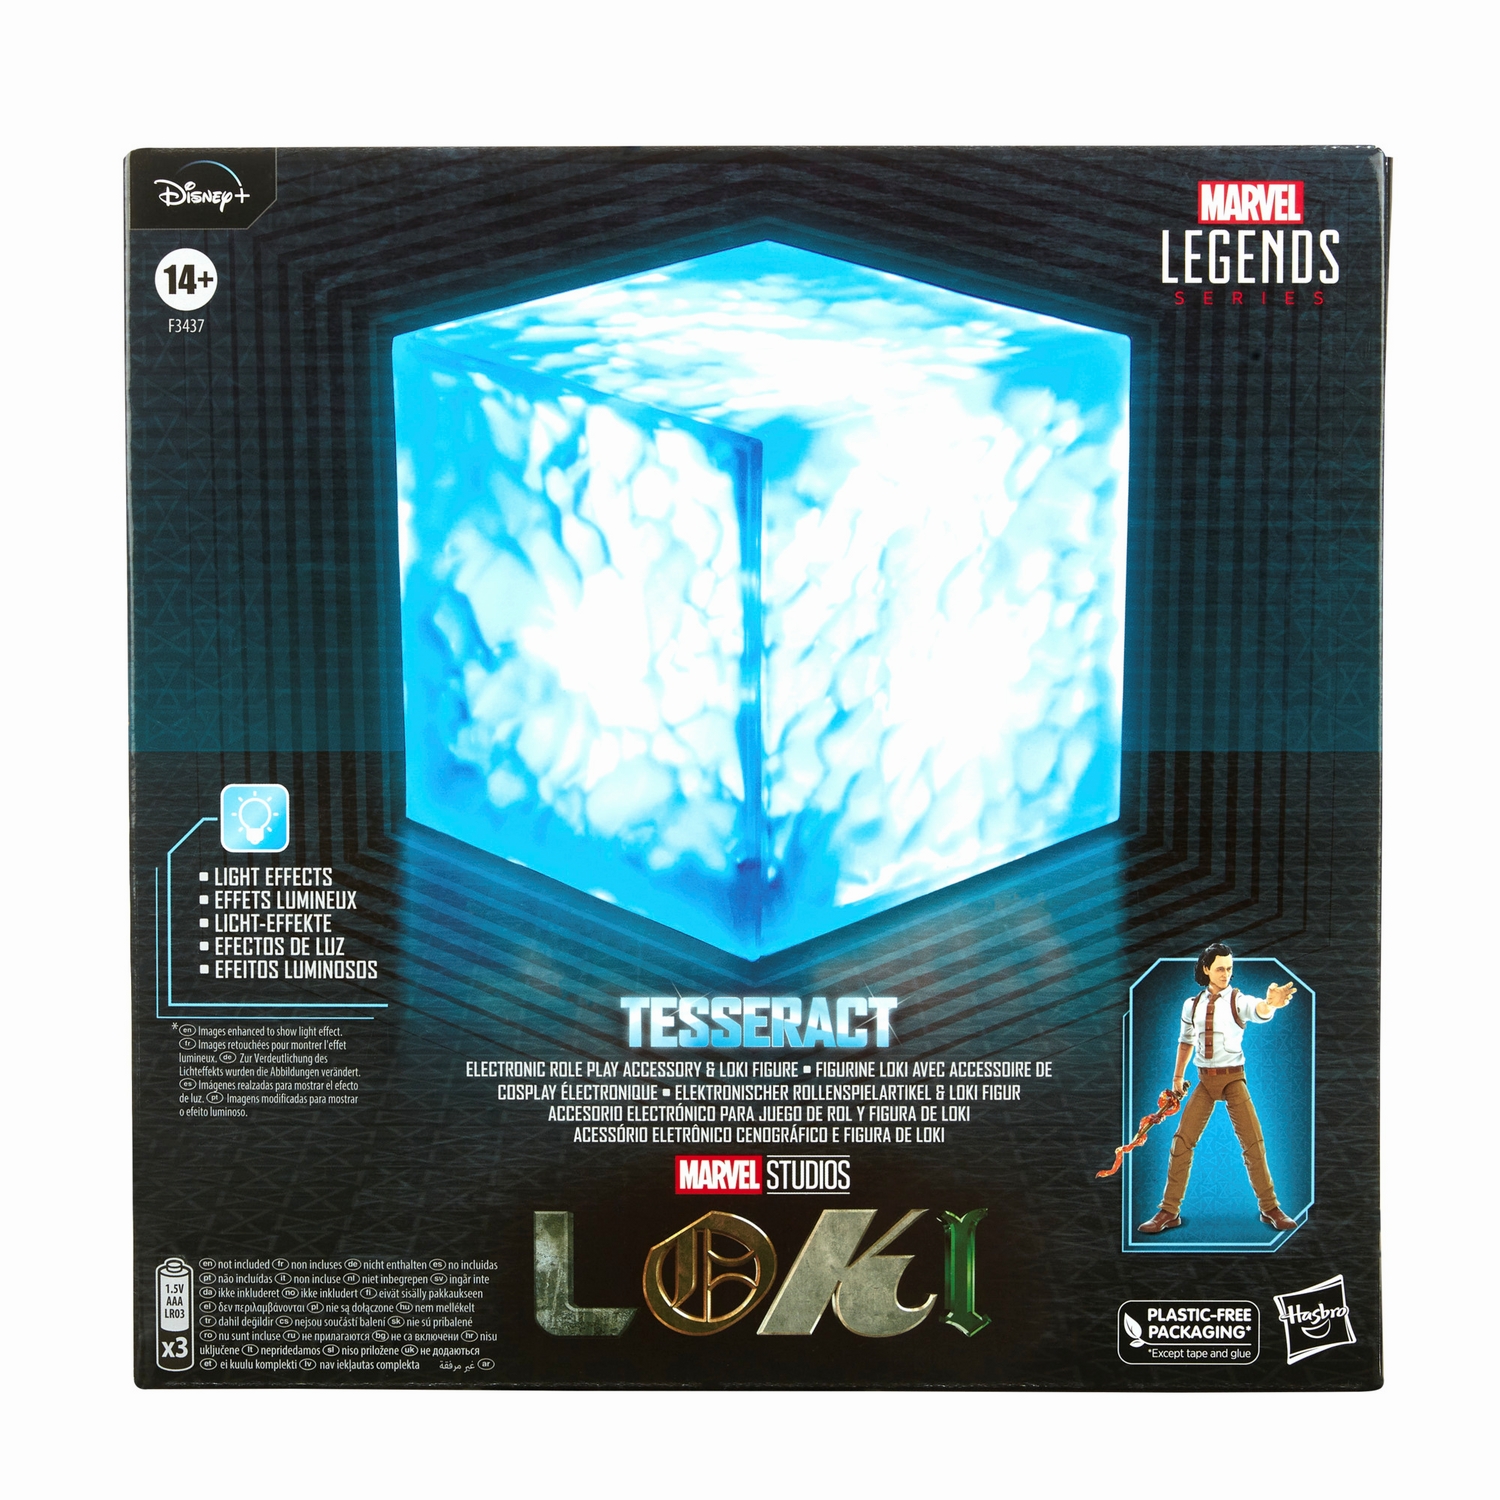 Marvel Legends Series Tesseract Electronic Role Play Accessory 9.jpg